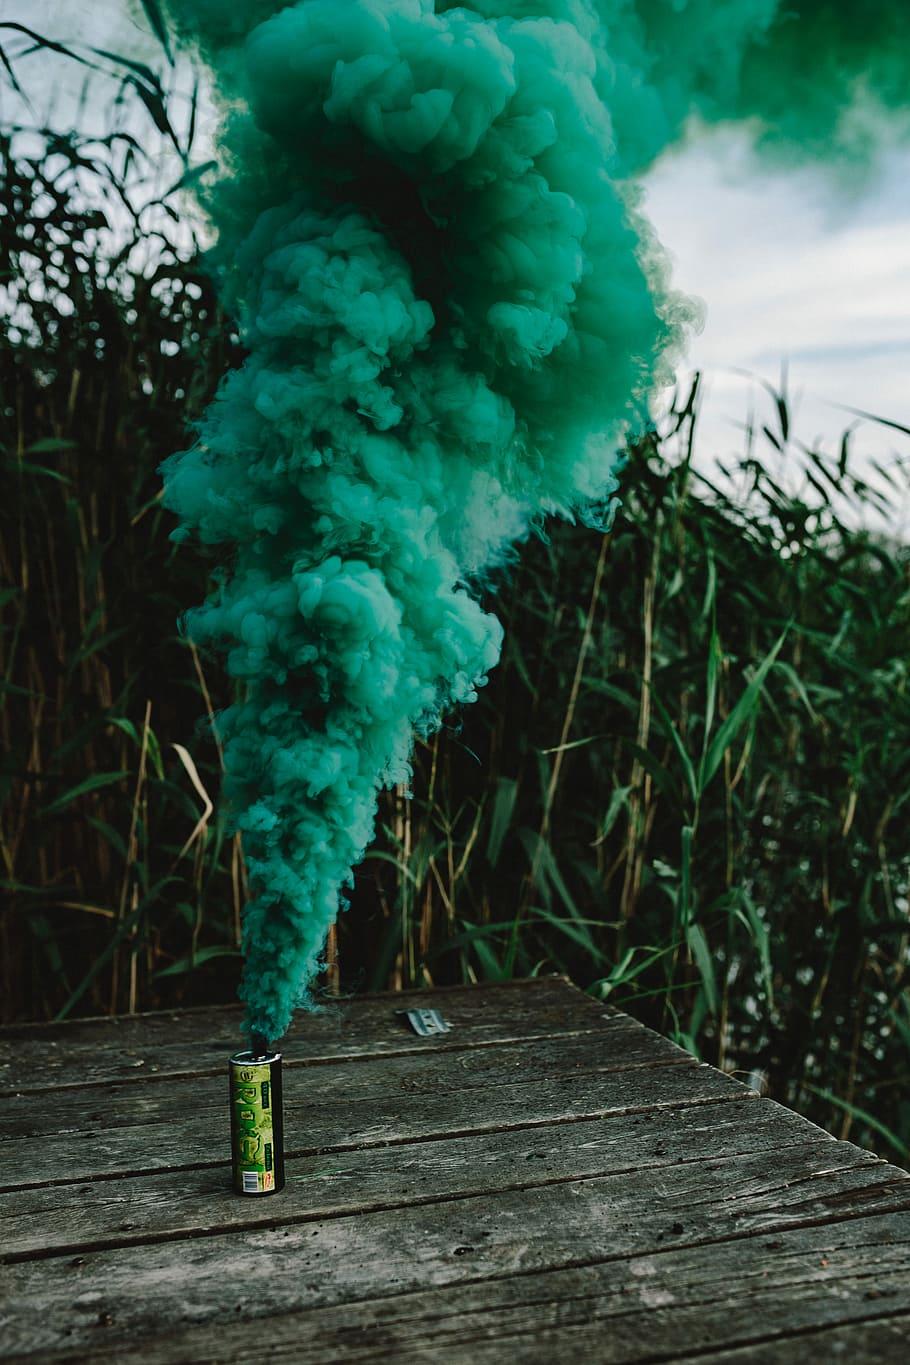 HD wallpaper: Green smoke bomb, abstract, background, outdoor, nature, wood